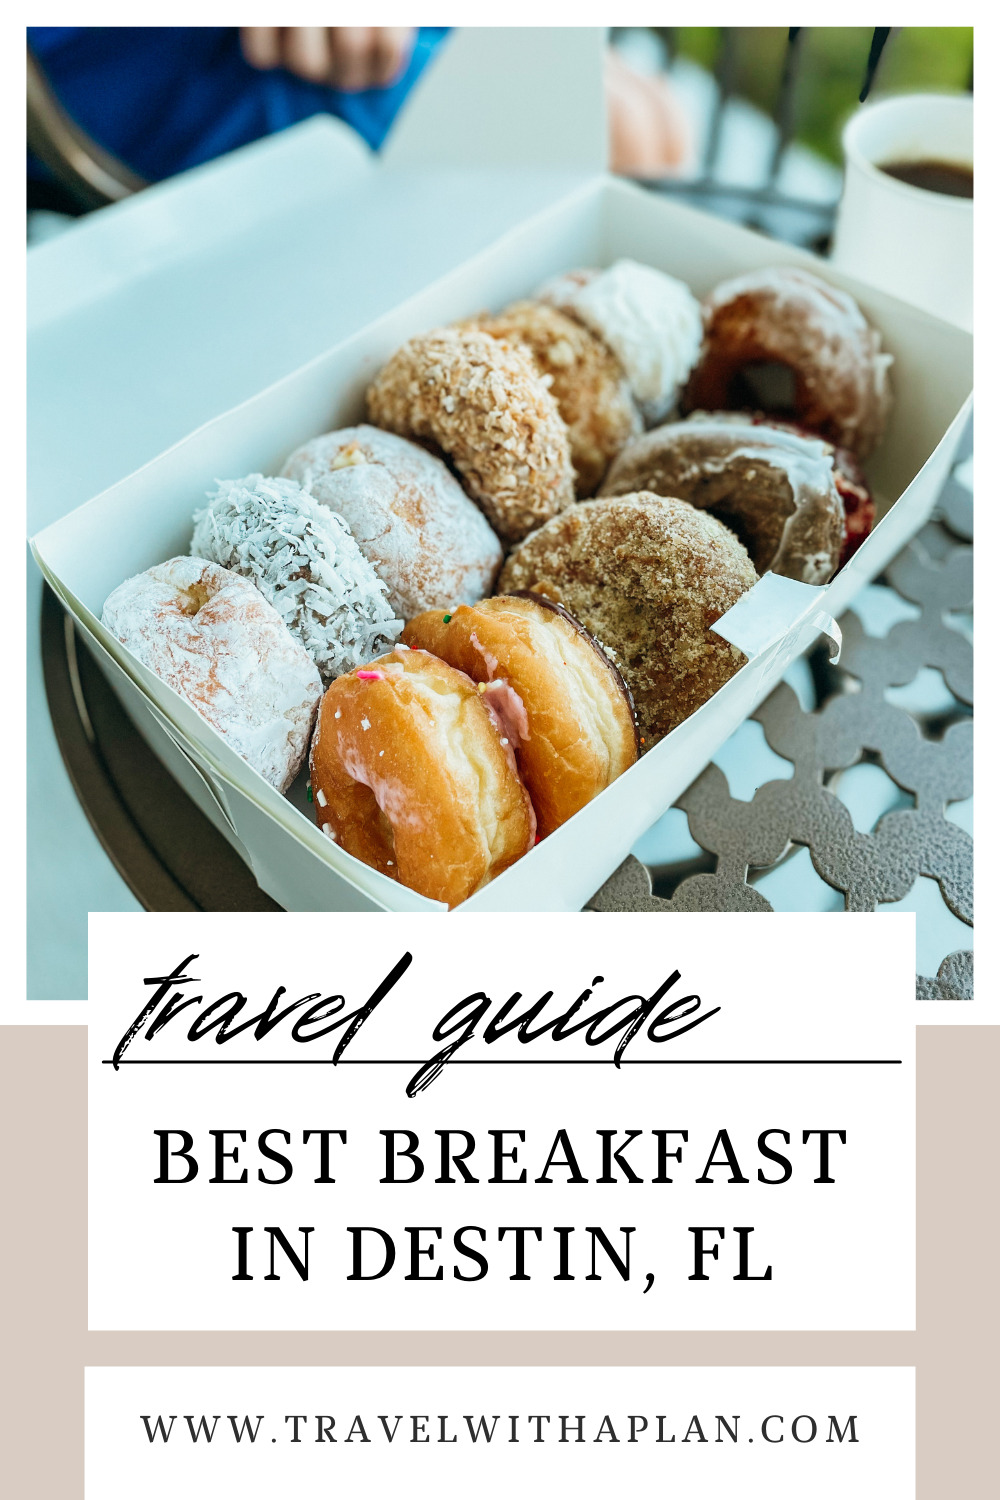 Check out our list of the best breakast in Destin, FL!  These Destin restaurants serve up amazing food and have a fun, relaxing atmosphere.  Start planning your breakfast in Destin now!  #floridavacation #DestinFL #Destinrestaurants